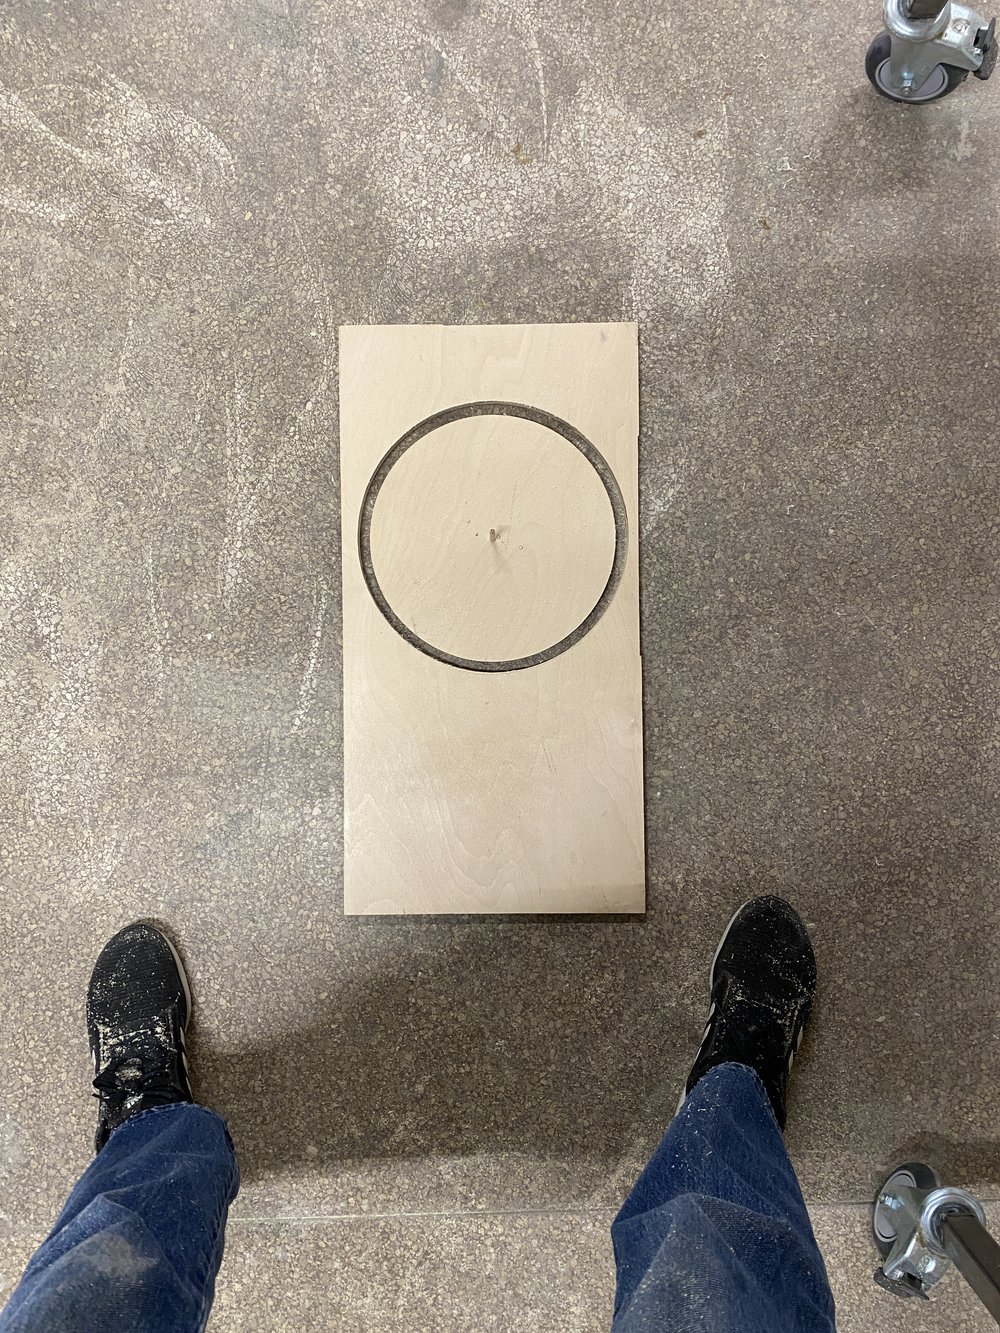 Circle cut out of wood panel